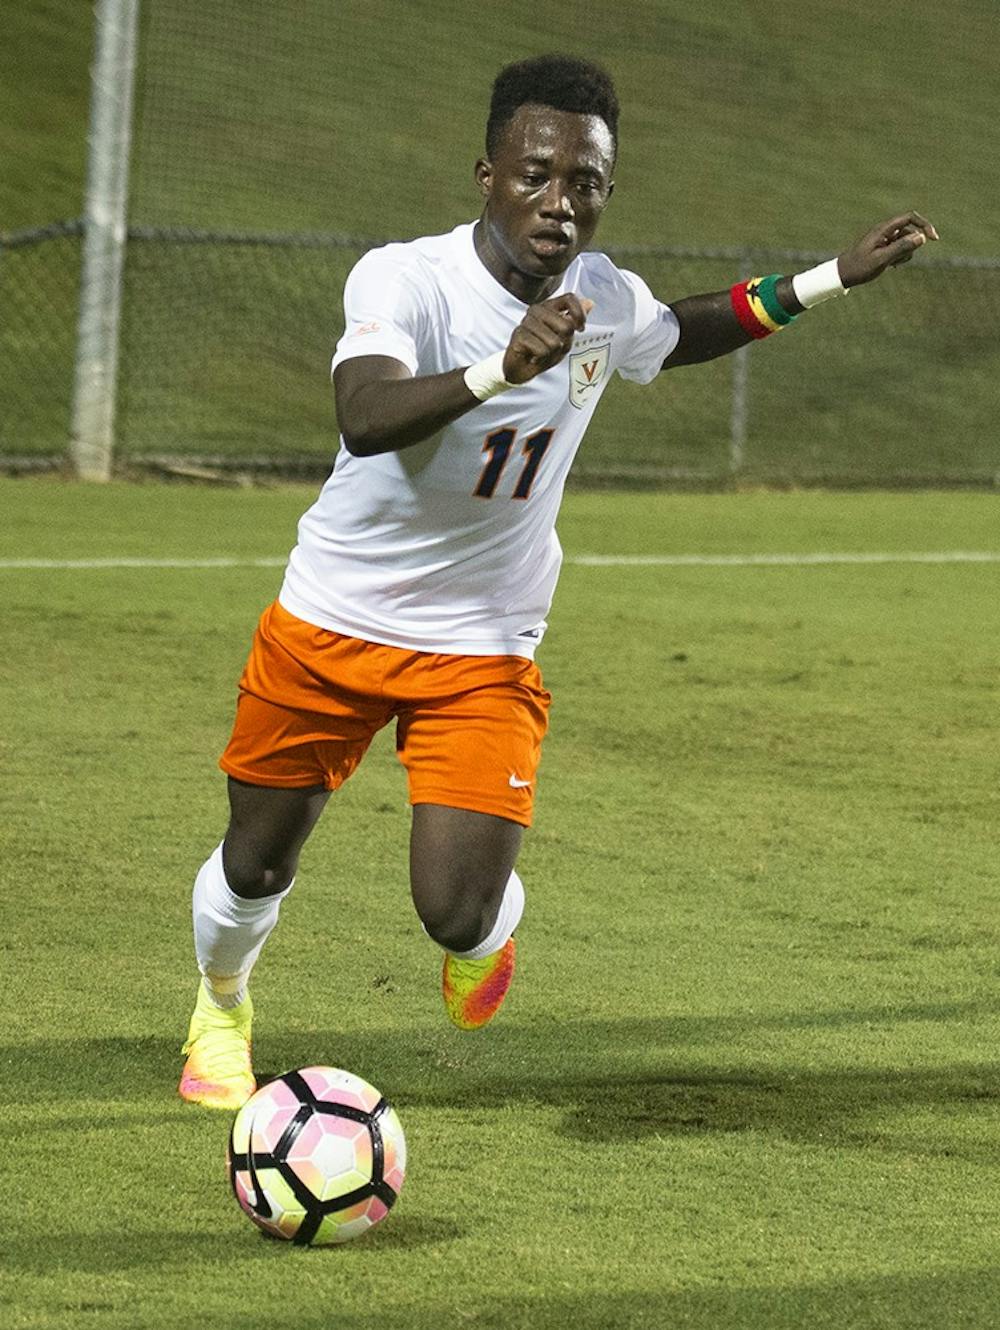 <p>Sophomore forward Edward Opoku broke the tie with a late-game goal Friday night, giving Virginia a win in its season opener against No. 21 Coastal Carolina.</p>